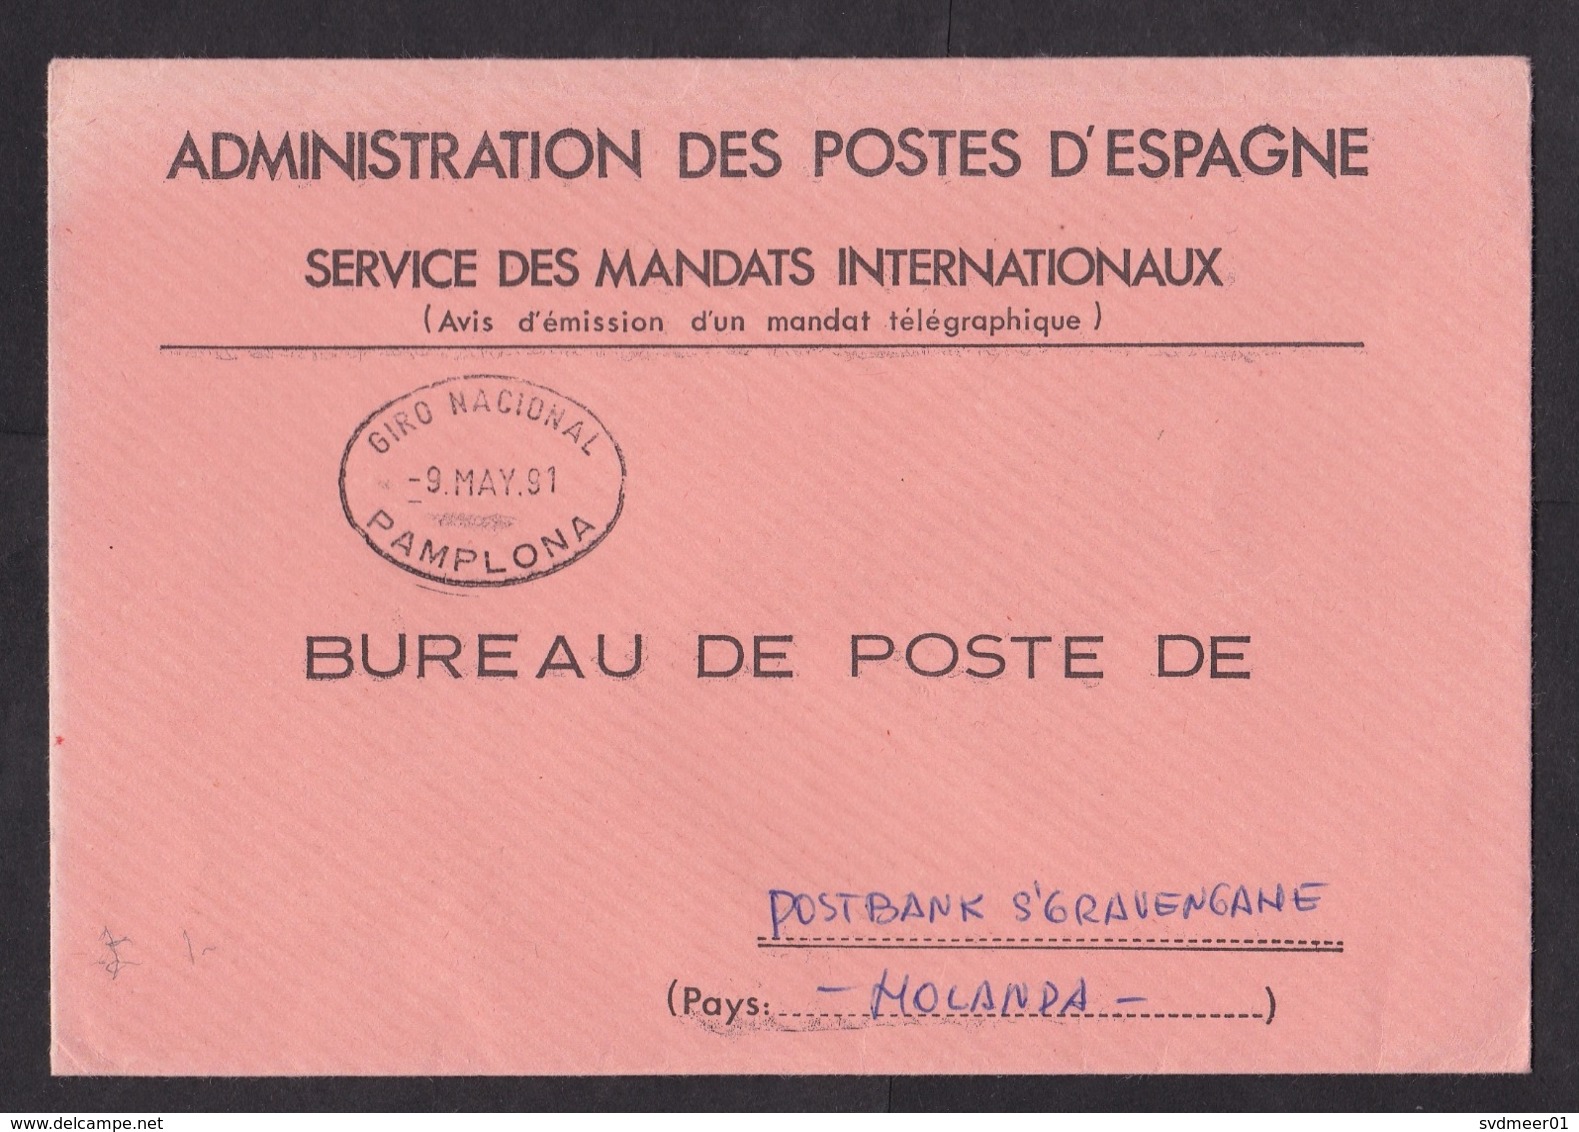 Spain: Official Cover To Netherlands, 1991, Cancel Giro Nacional Pamplona, Service Mandats, Postal Bank (traces Of Use) - Briefe U. Dokumente